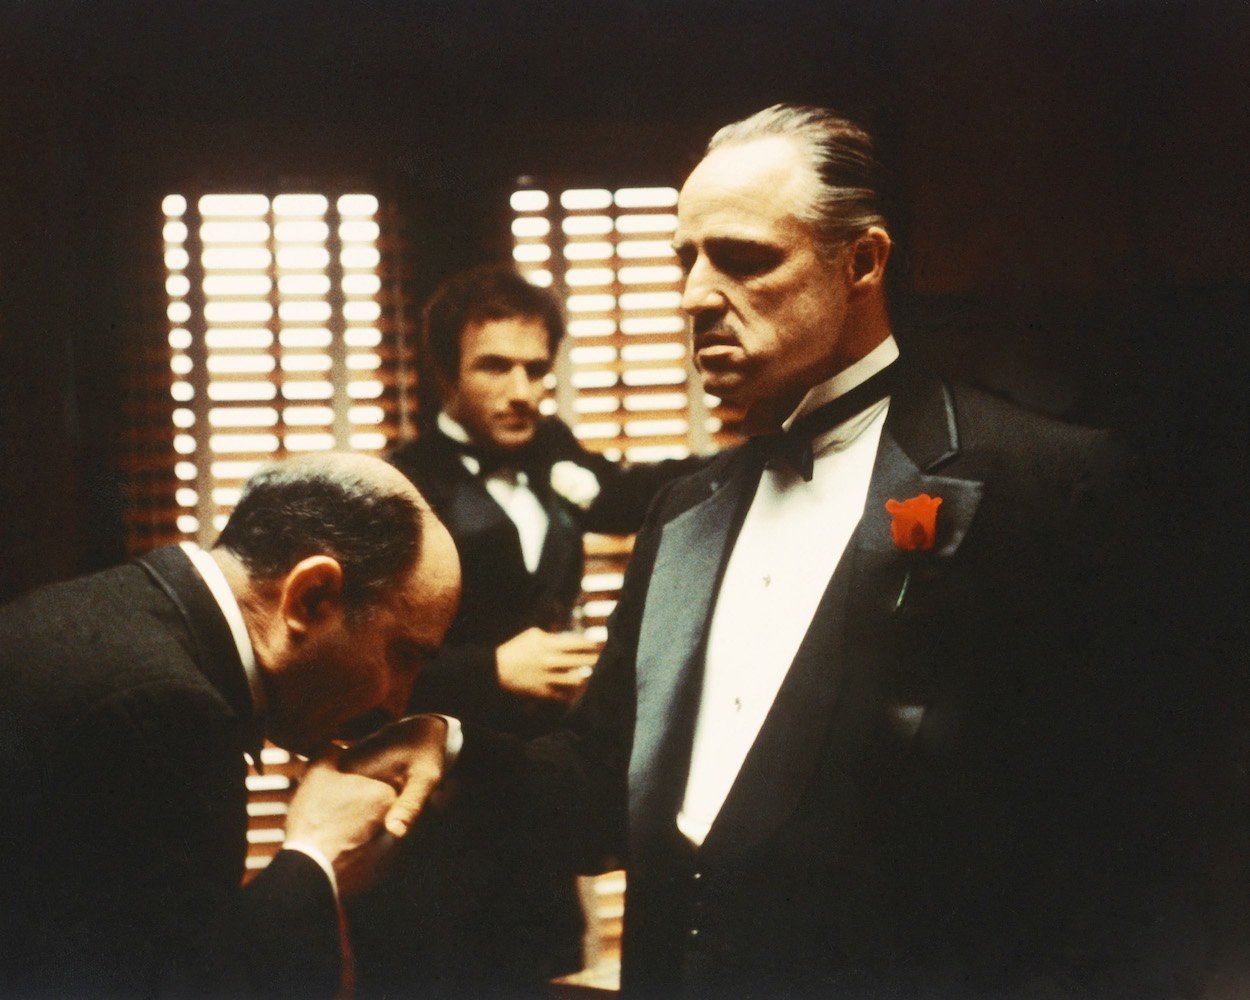 Salvatore Corsitto (from left), James Caan, and Marlon Brando inside 'The Godfather' mansion in the first movie. For the right price, anyone can book an Airbnb stay at 'The Godfather' mansion that featured so prominently in the movie.